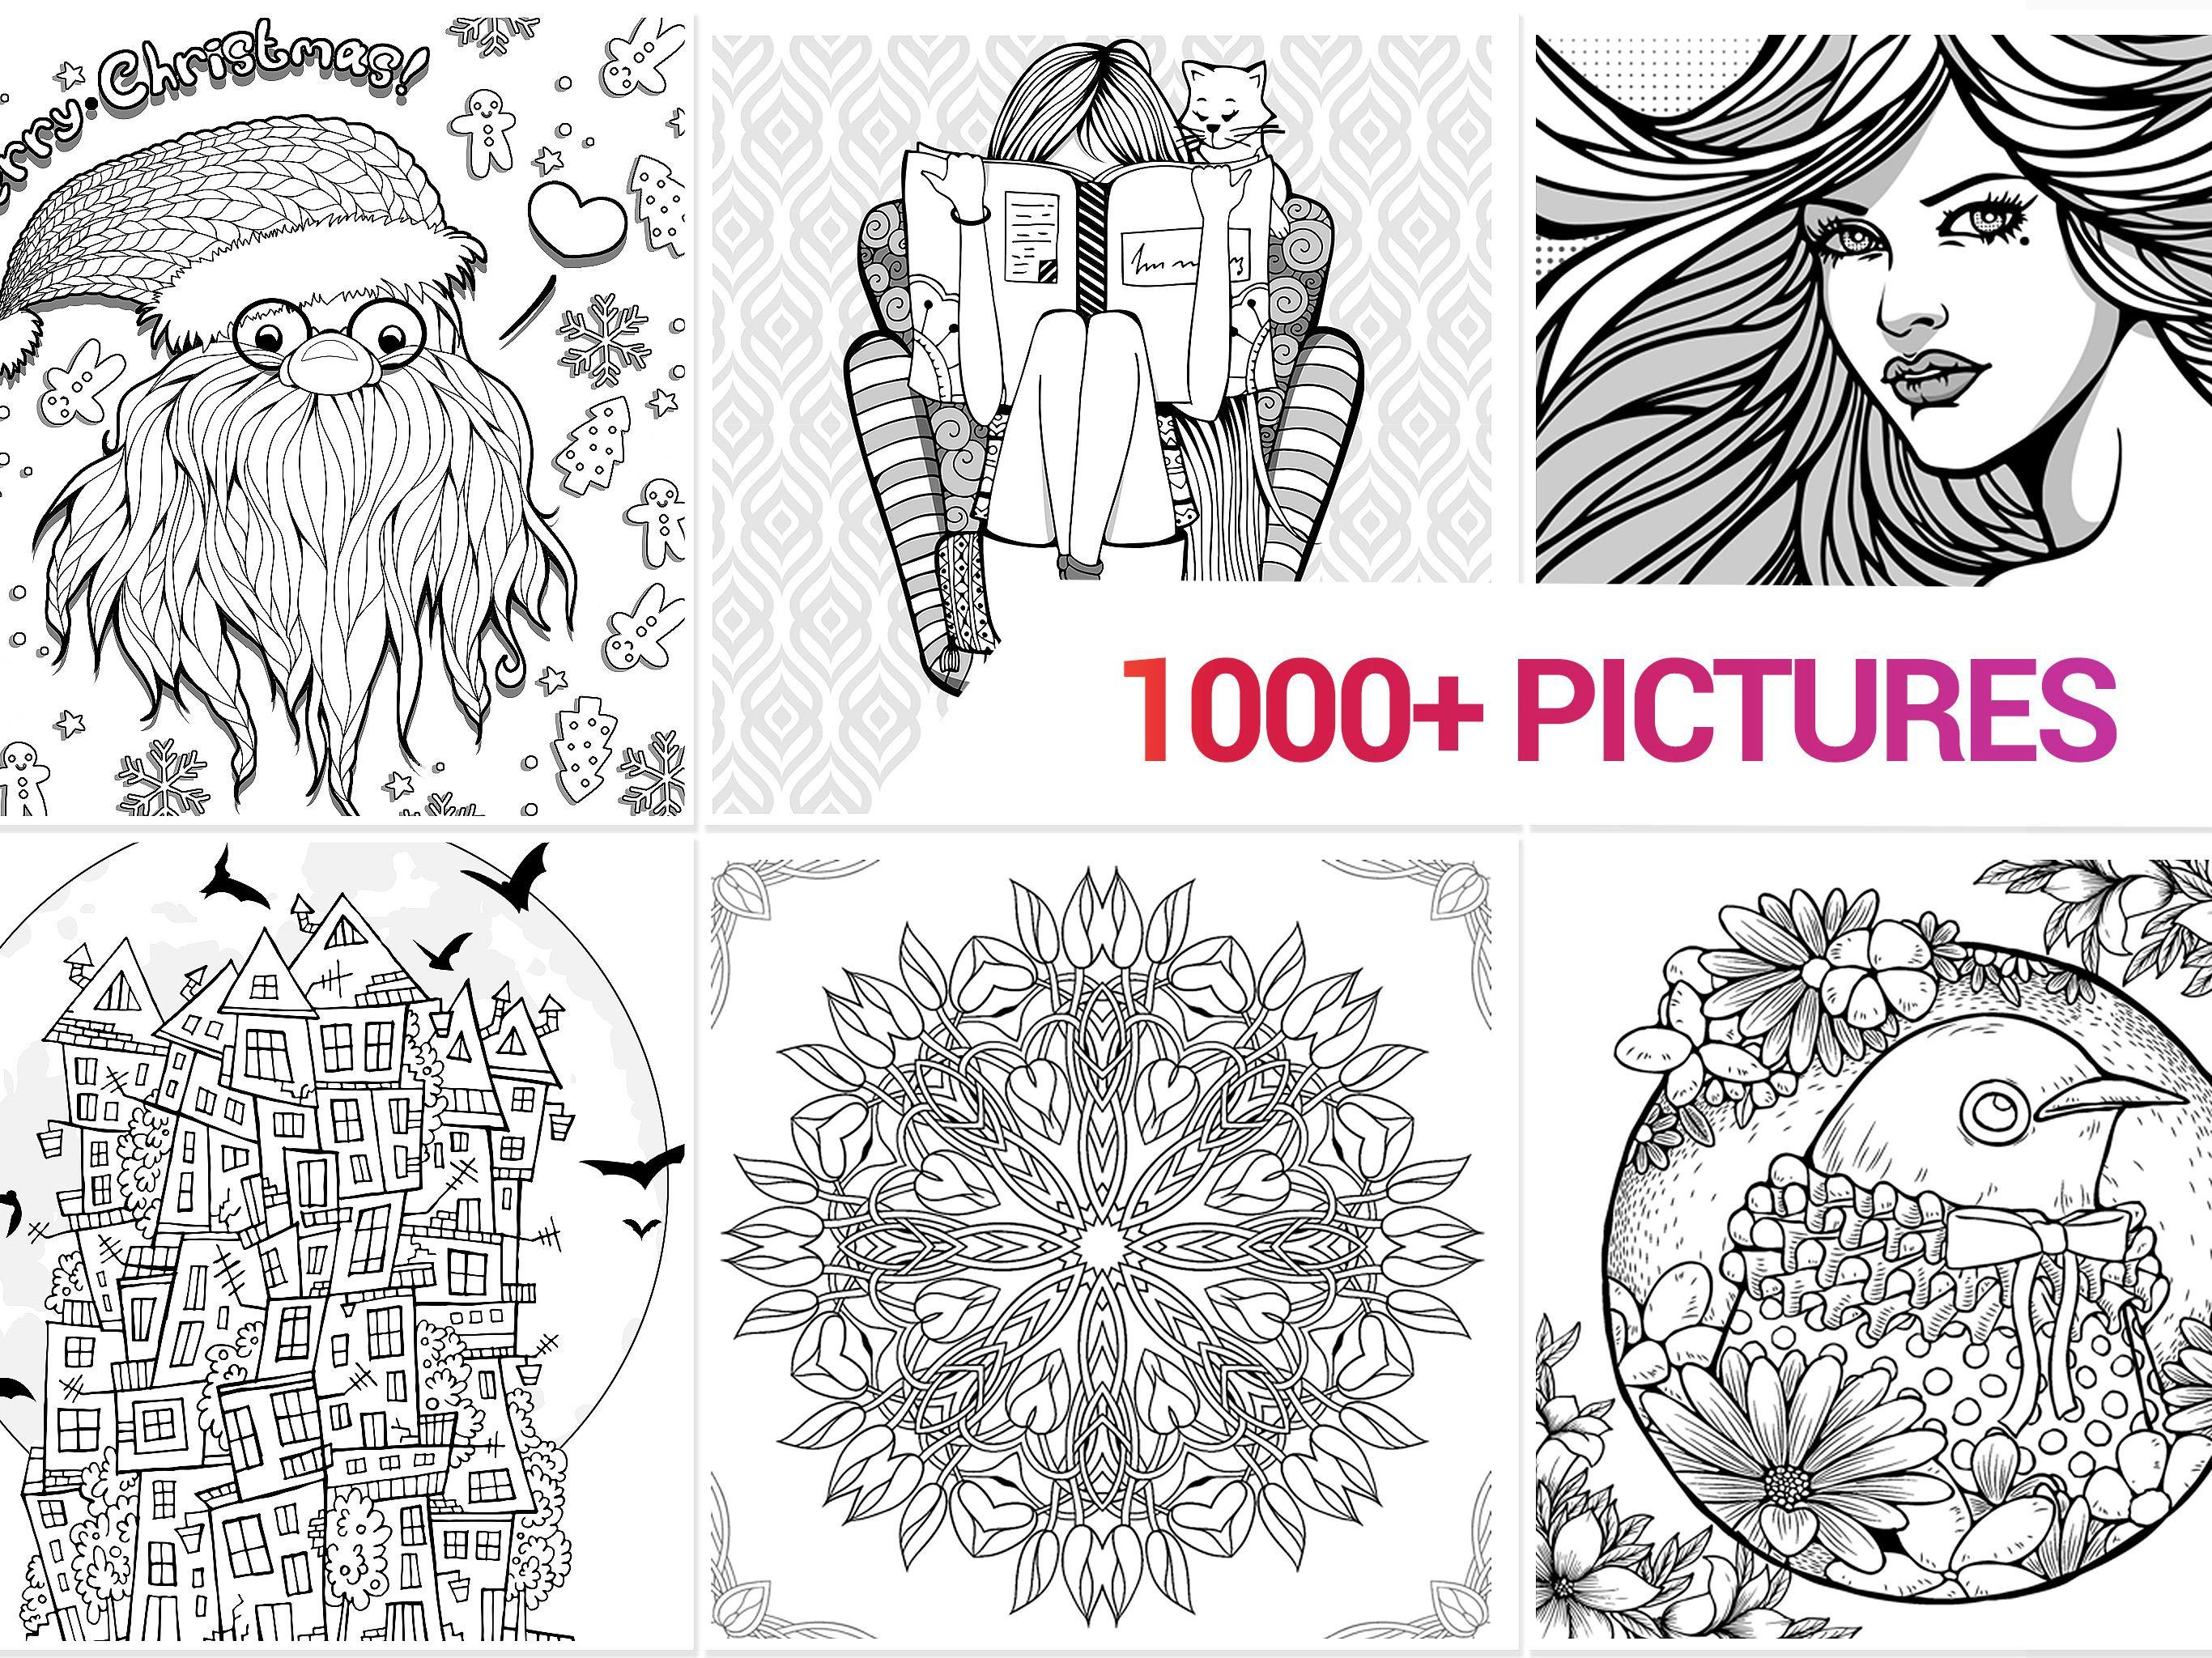 Color Me | Free Adult Coloring Book for Adults App for Android - APK